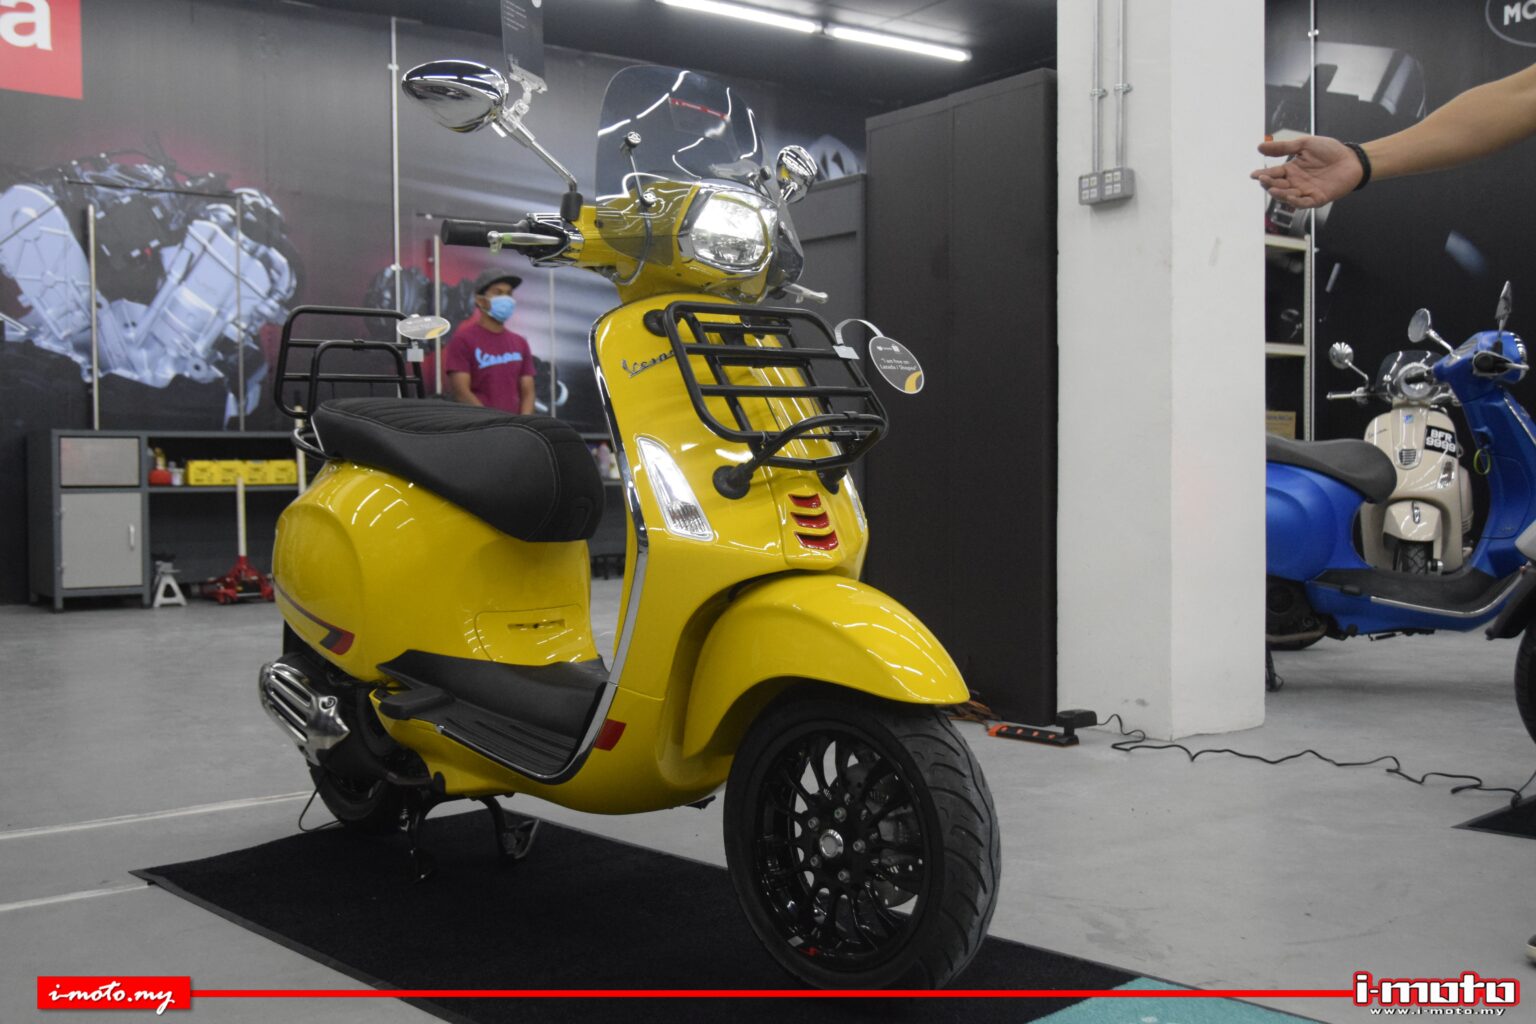 Forged from the Vespa sport DNA, the new Vespa 2020 model's line-up has ...